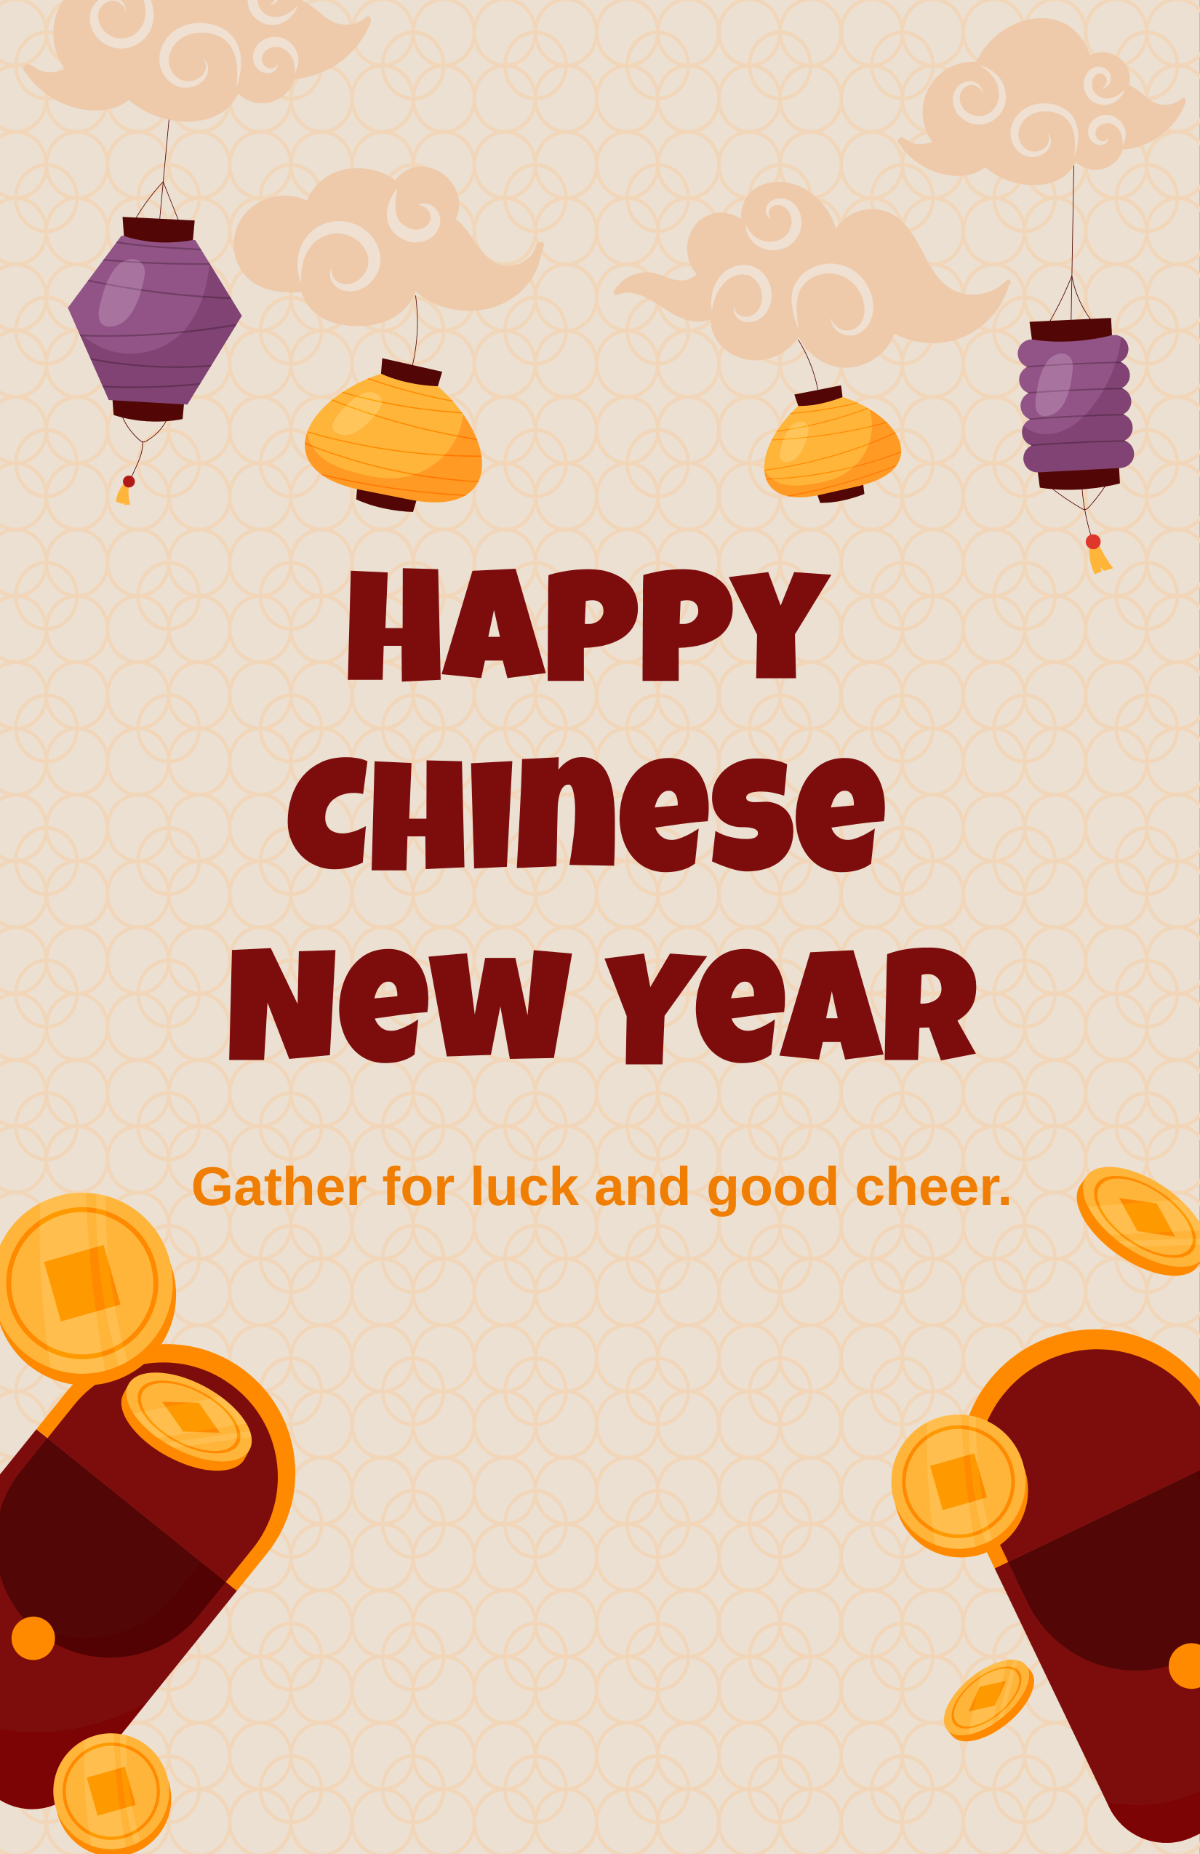 Chinese New Year Poster Design Template